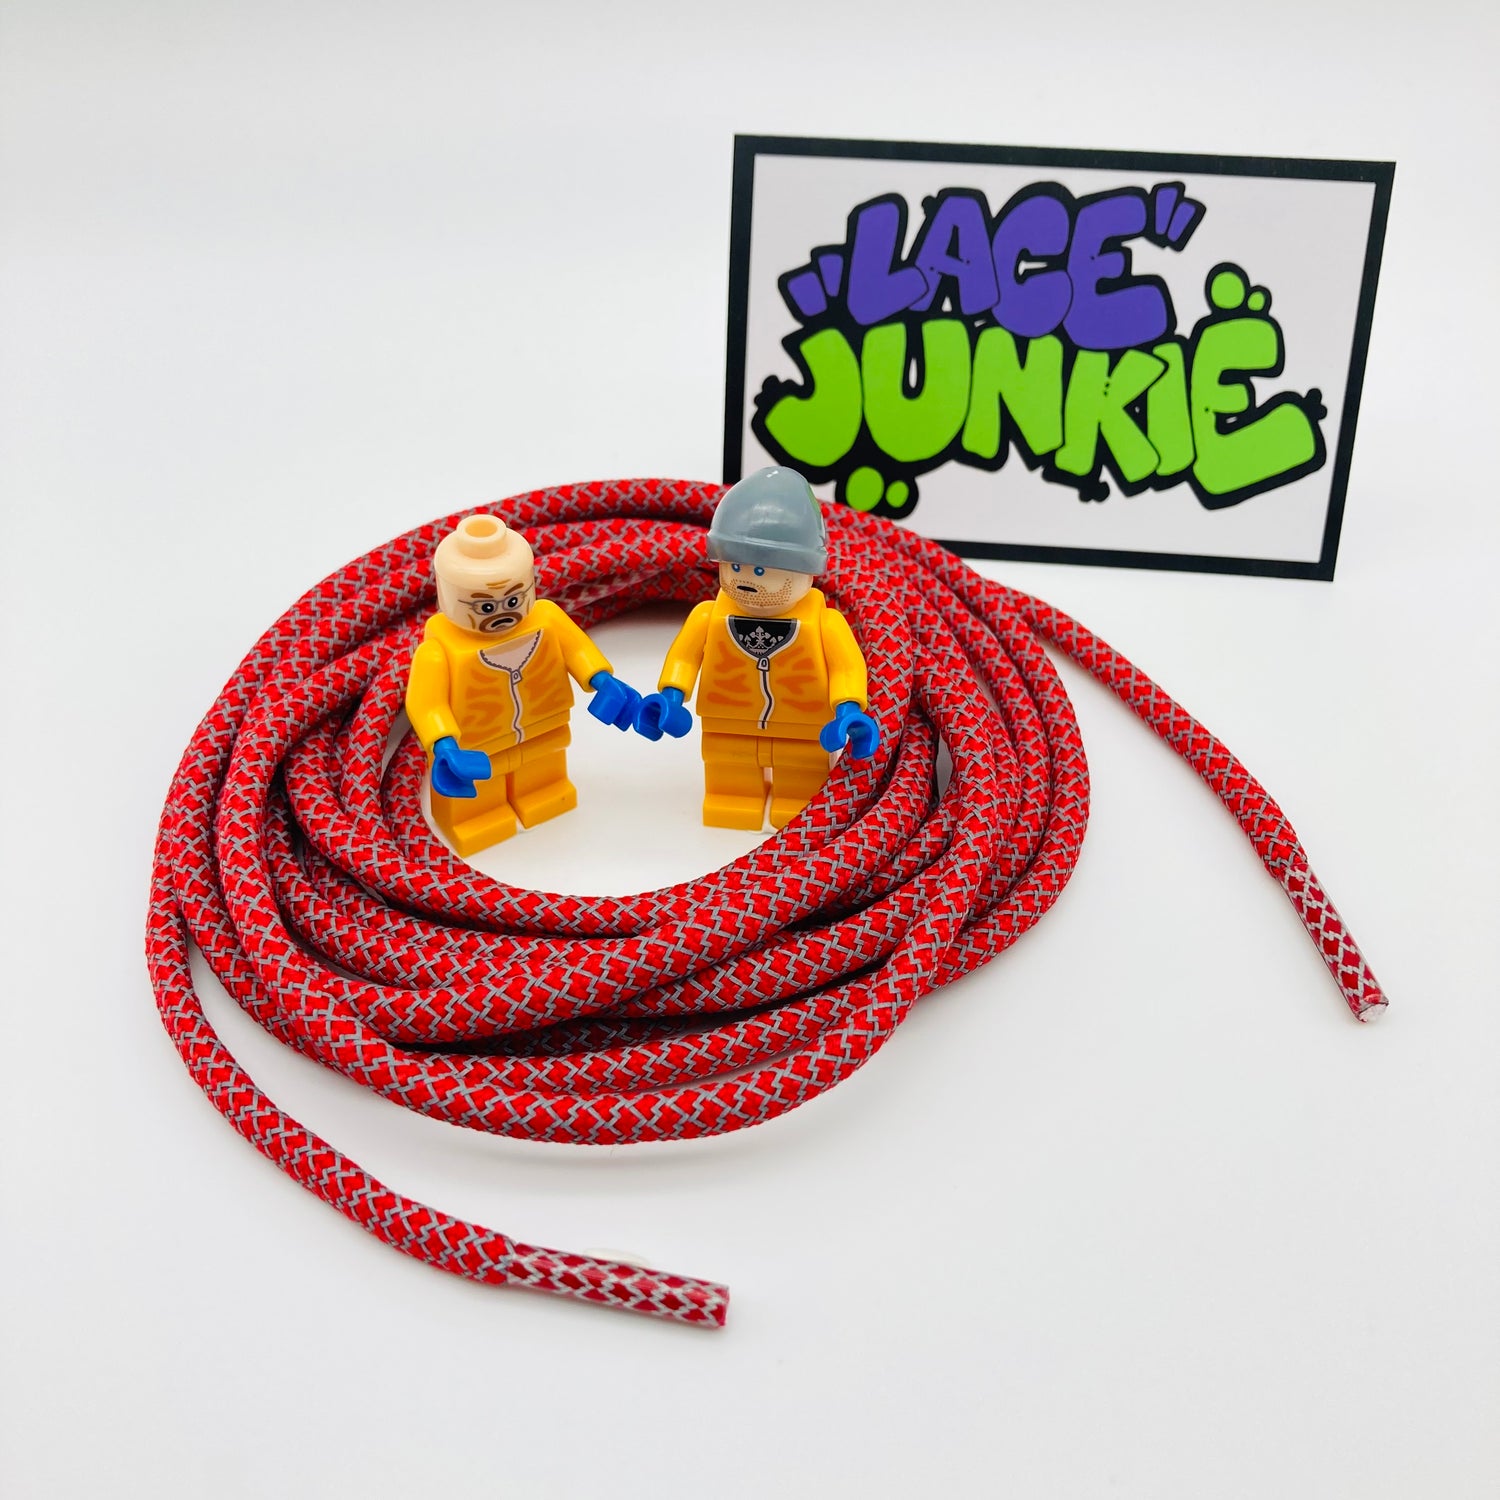 Lace Junkie Red 3M Reflective Rope Laces